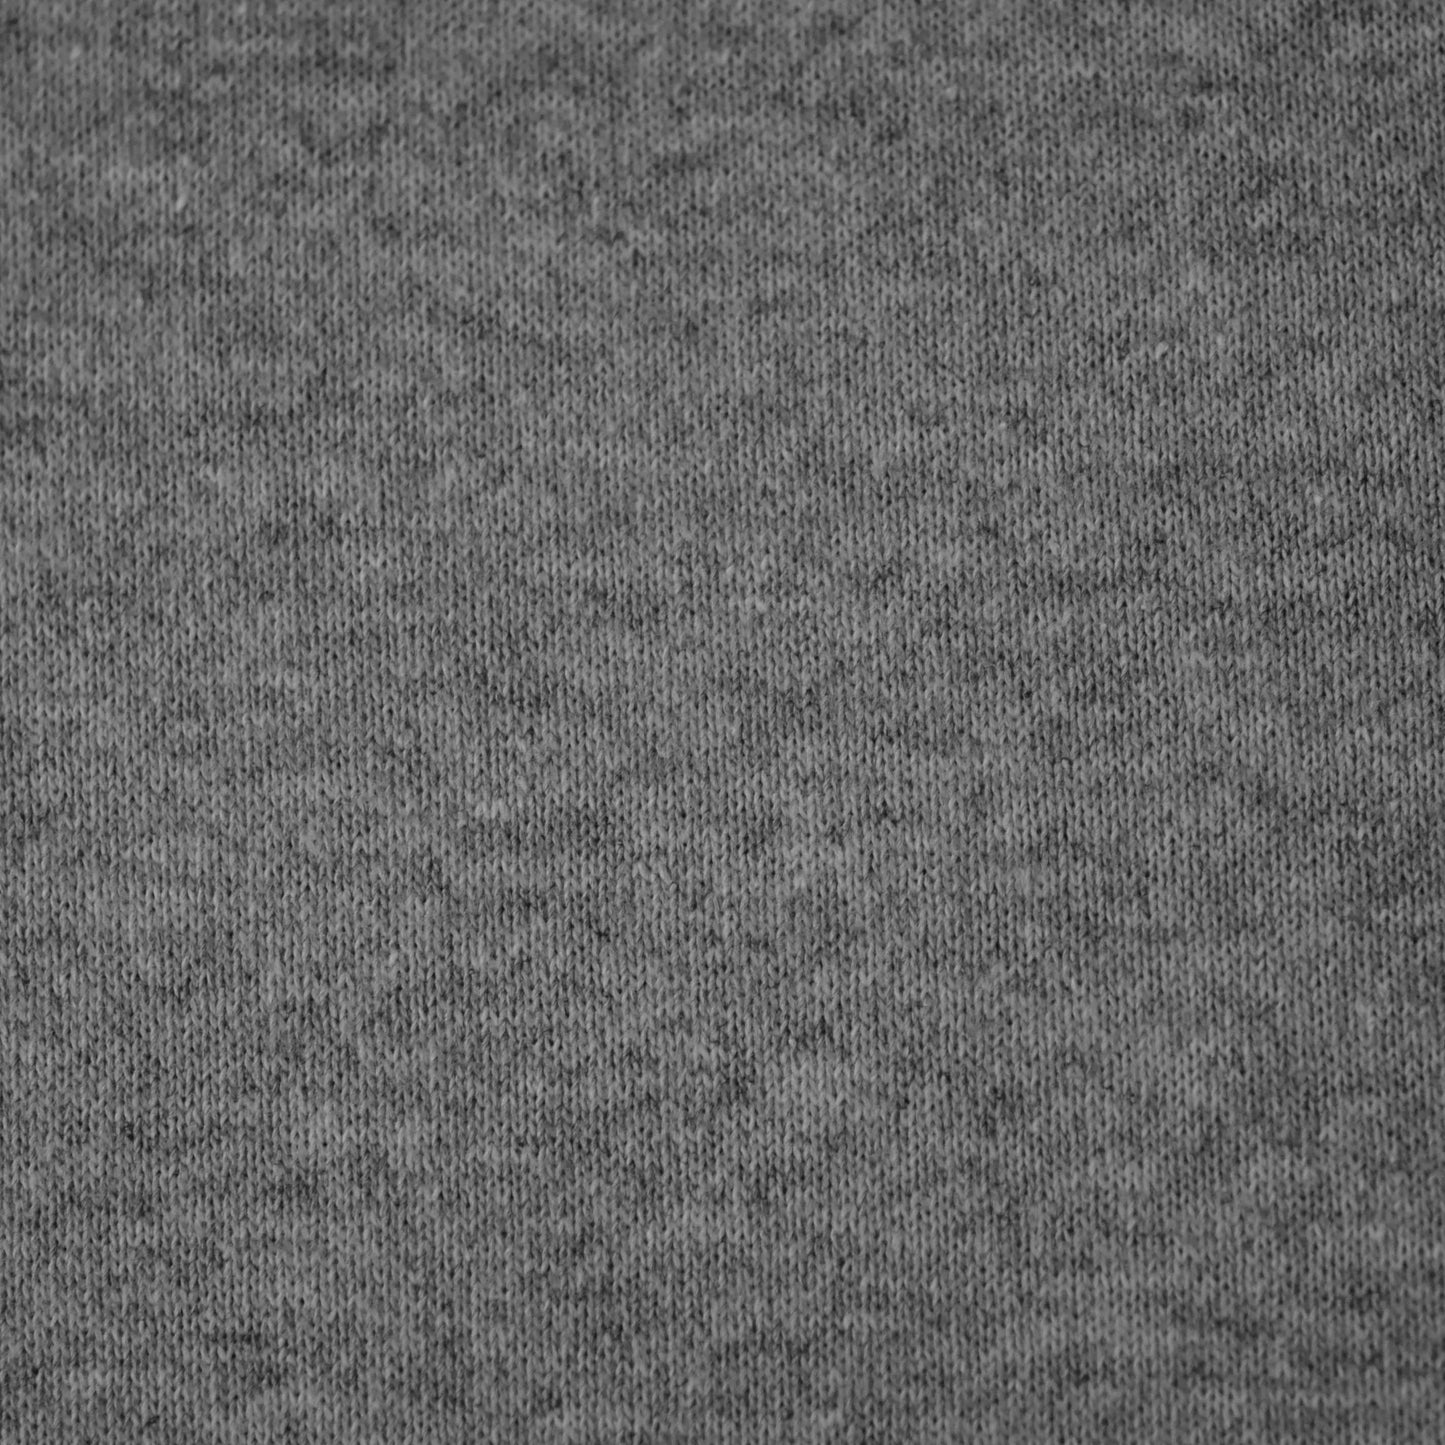 55% Repreve Post Consumer Recycled Polyester, 45% Pre Consumer Recycled Cotton Diagonal French Terry - Grey Melange (2FT310)